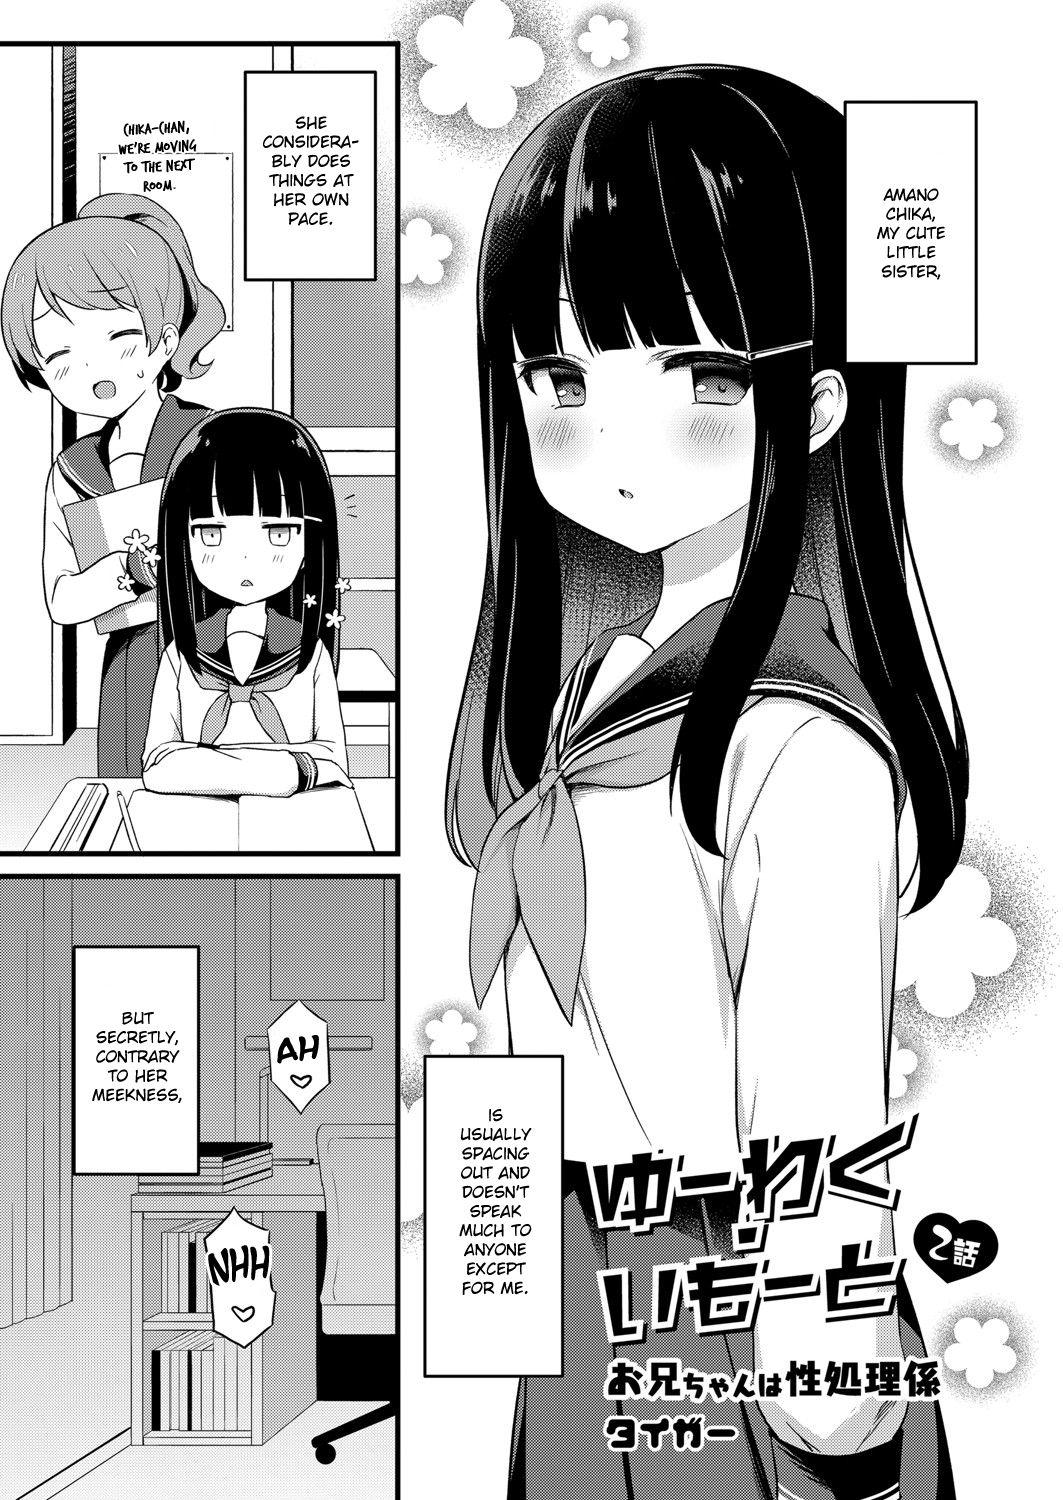 Hot [Tiger] Yuuwaku・Imouto #2 Onii-chan wa seishori gakari | Little Sister Temptation #2 Onii-chan is in Charge of My Libido Management (COMIC Reboot Vol. 07) [English] [Digital] Stepsiblings - Picture 1